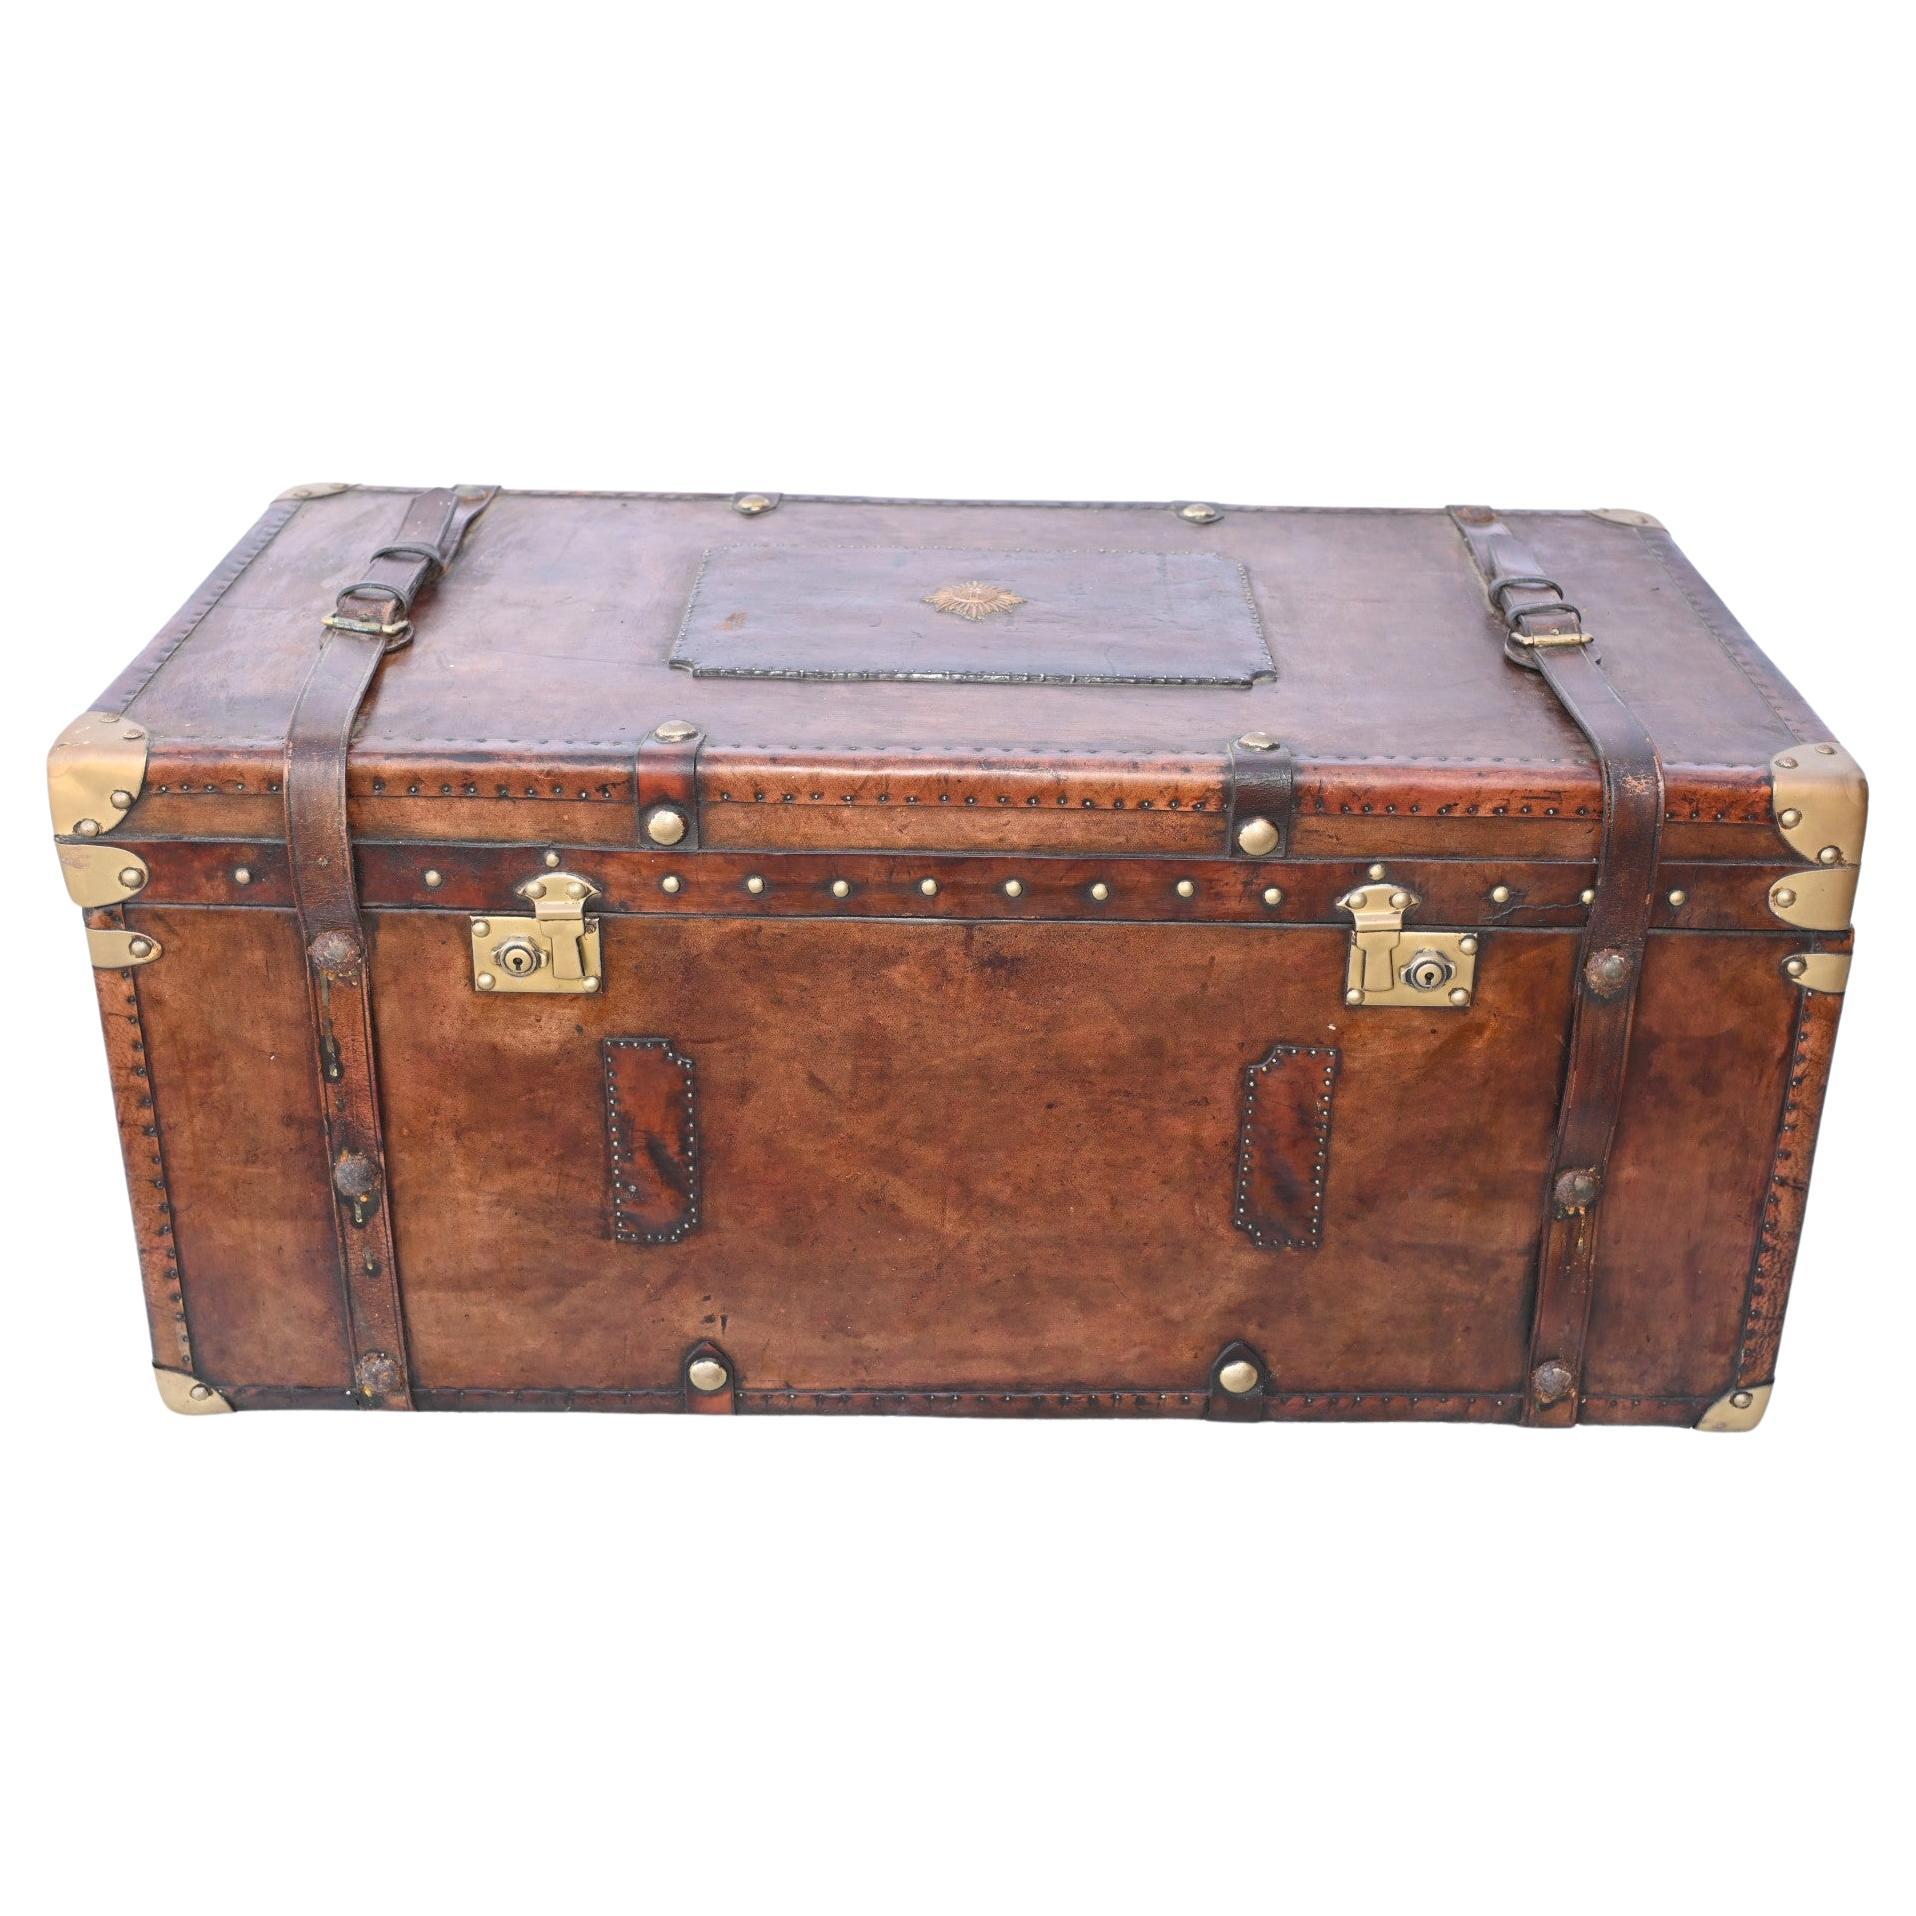 Vintage Luggage Box Steamer Trunk Coffee Table